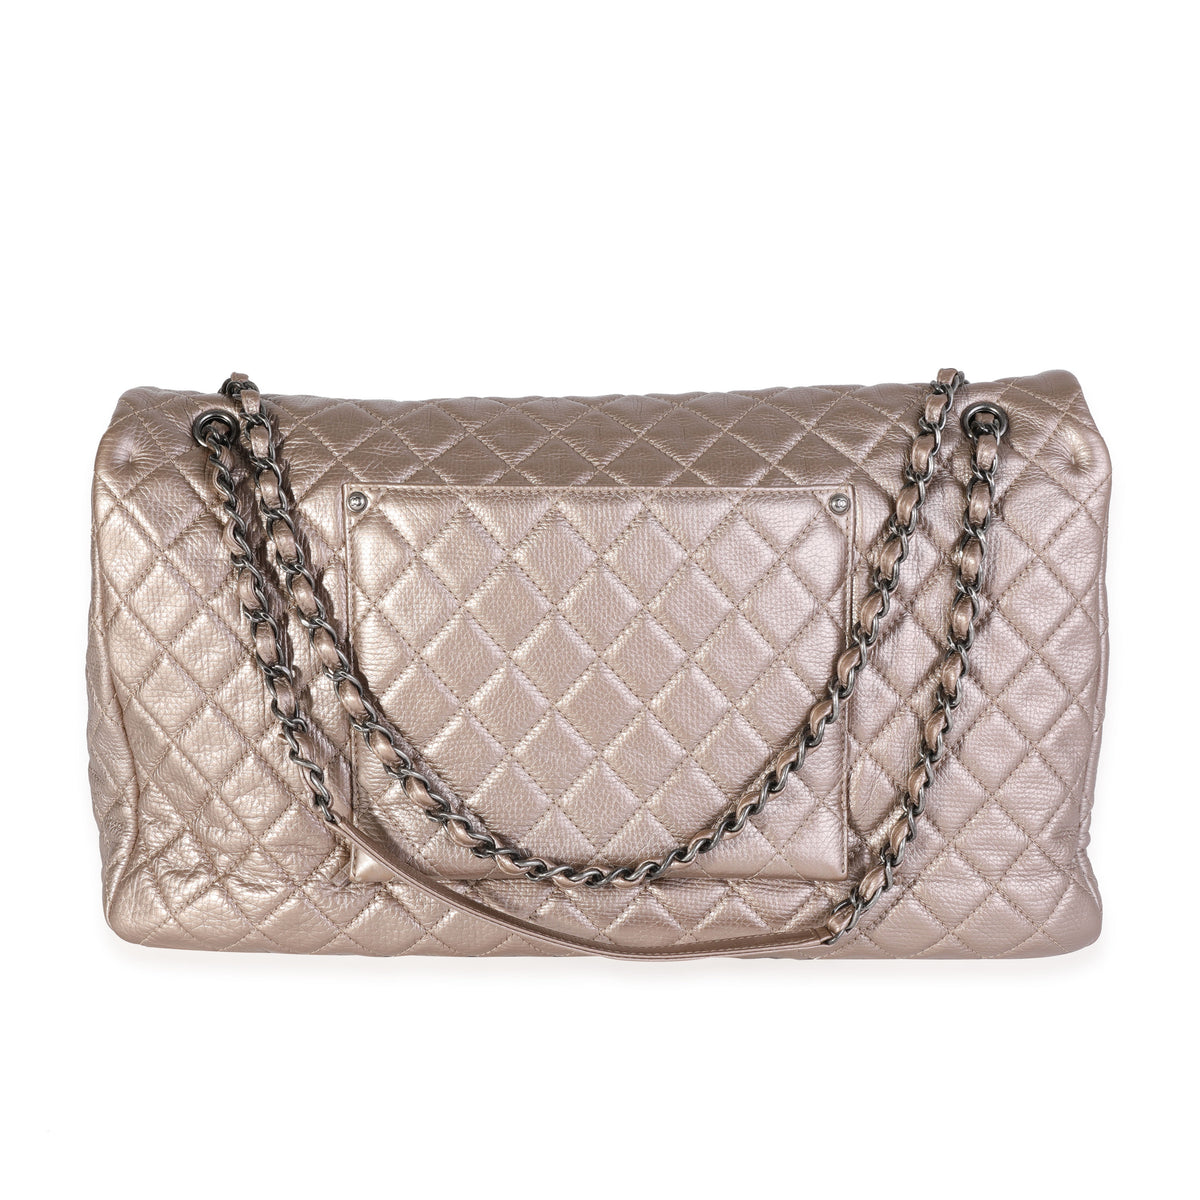 Chanel Metallic Gold Quilted Calfskin Chanel Airlines XXL Travel